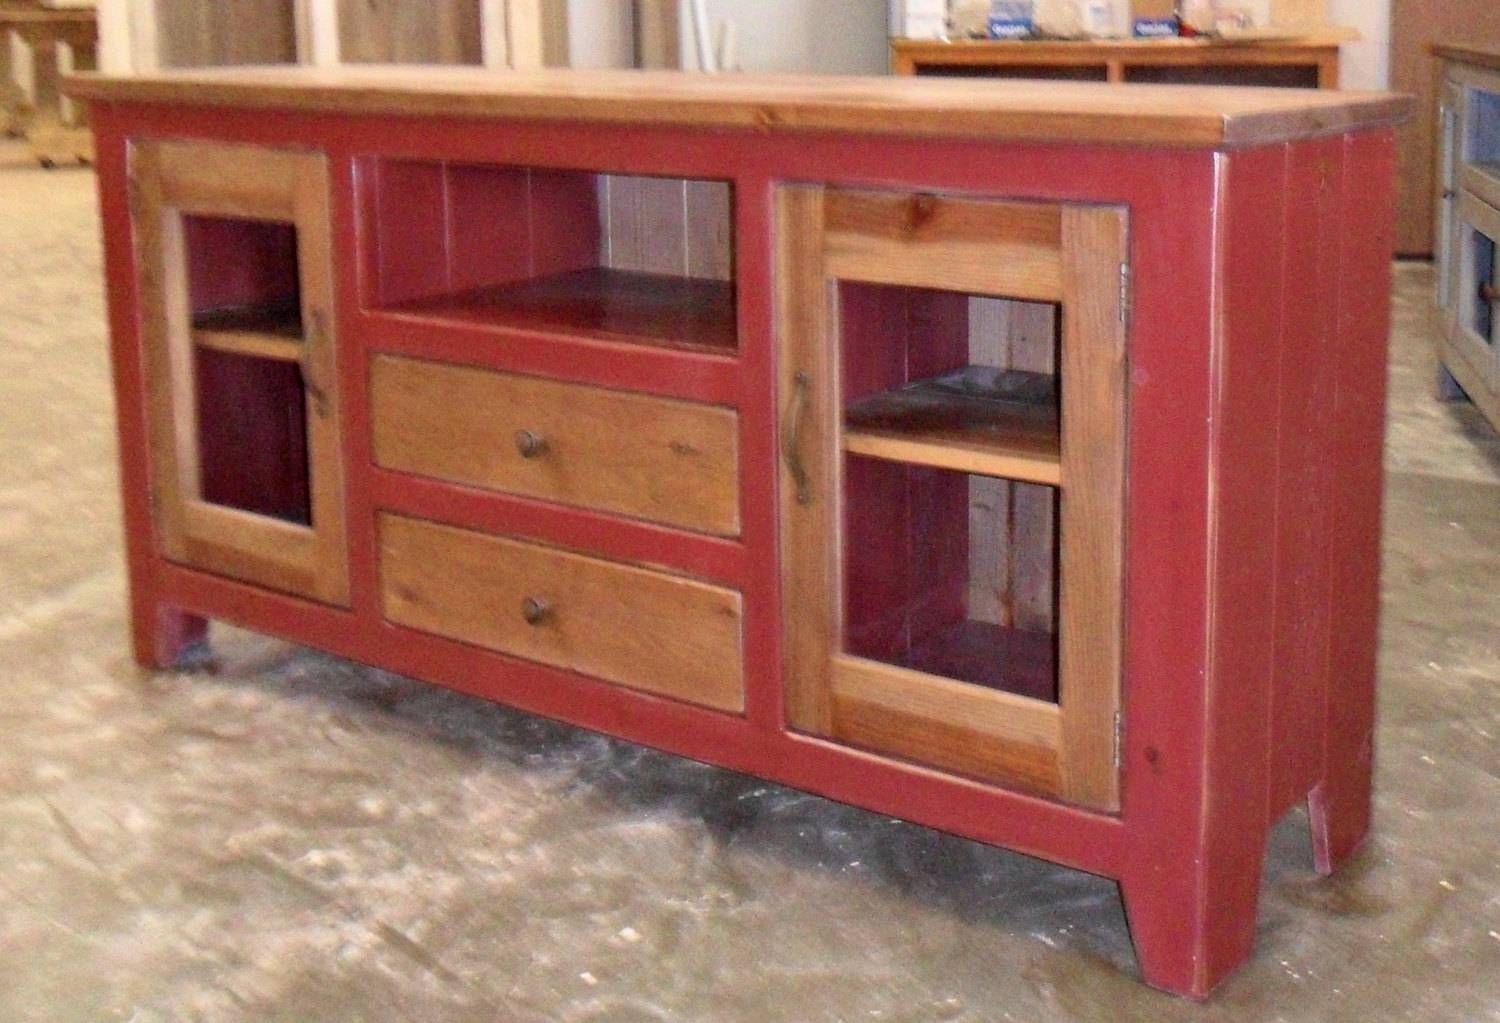 Media Cabinet Reclaimed Wood Tv Stand Rustic Vintage Inside Red Tv Cabinets (View 10 of 15)